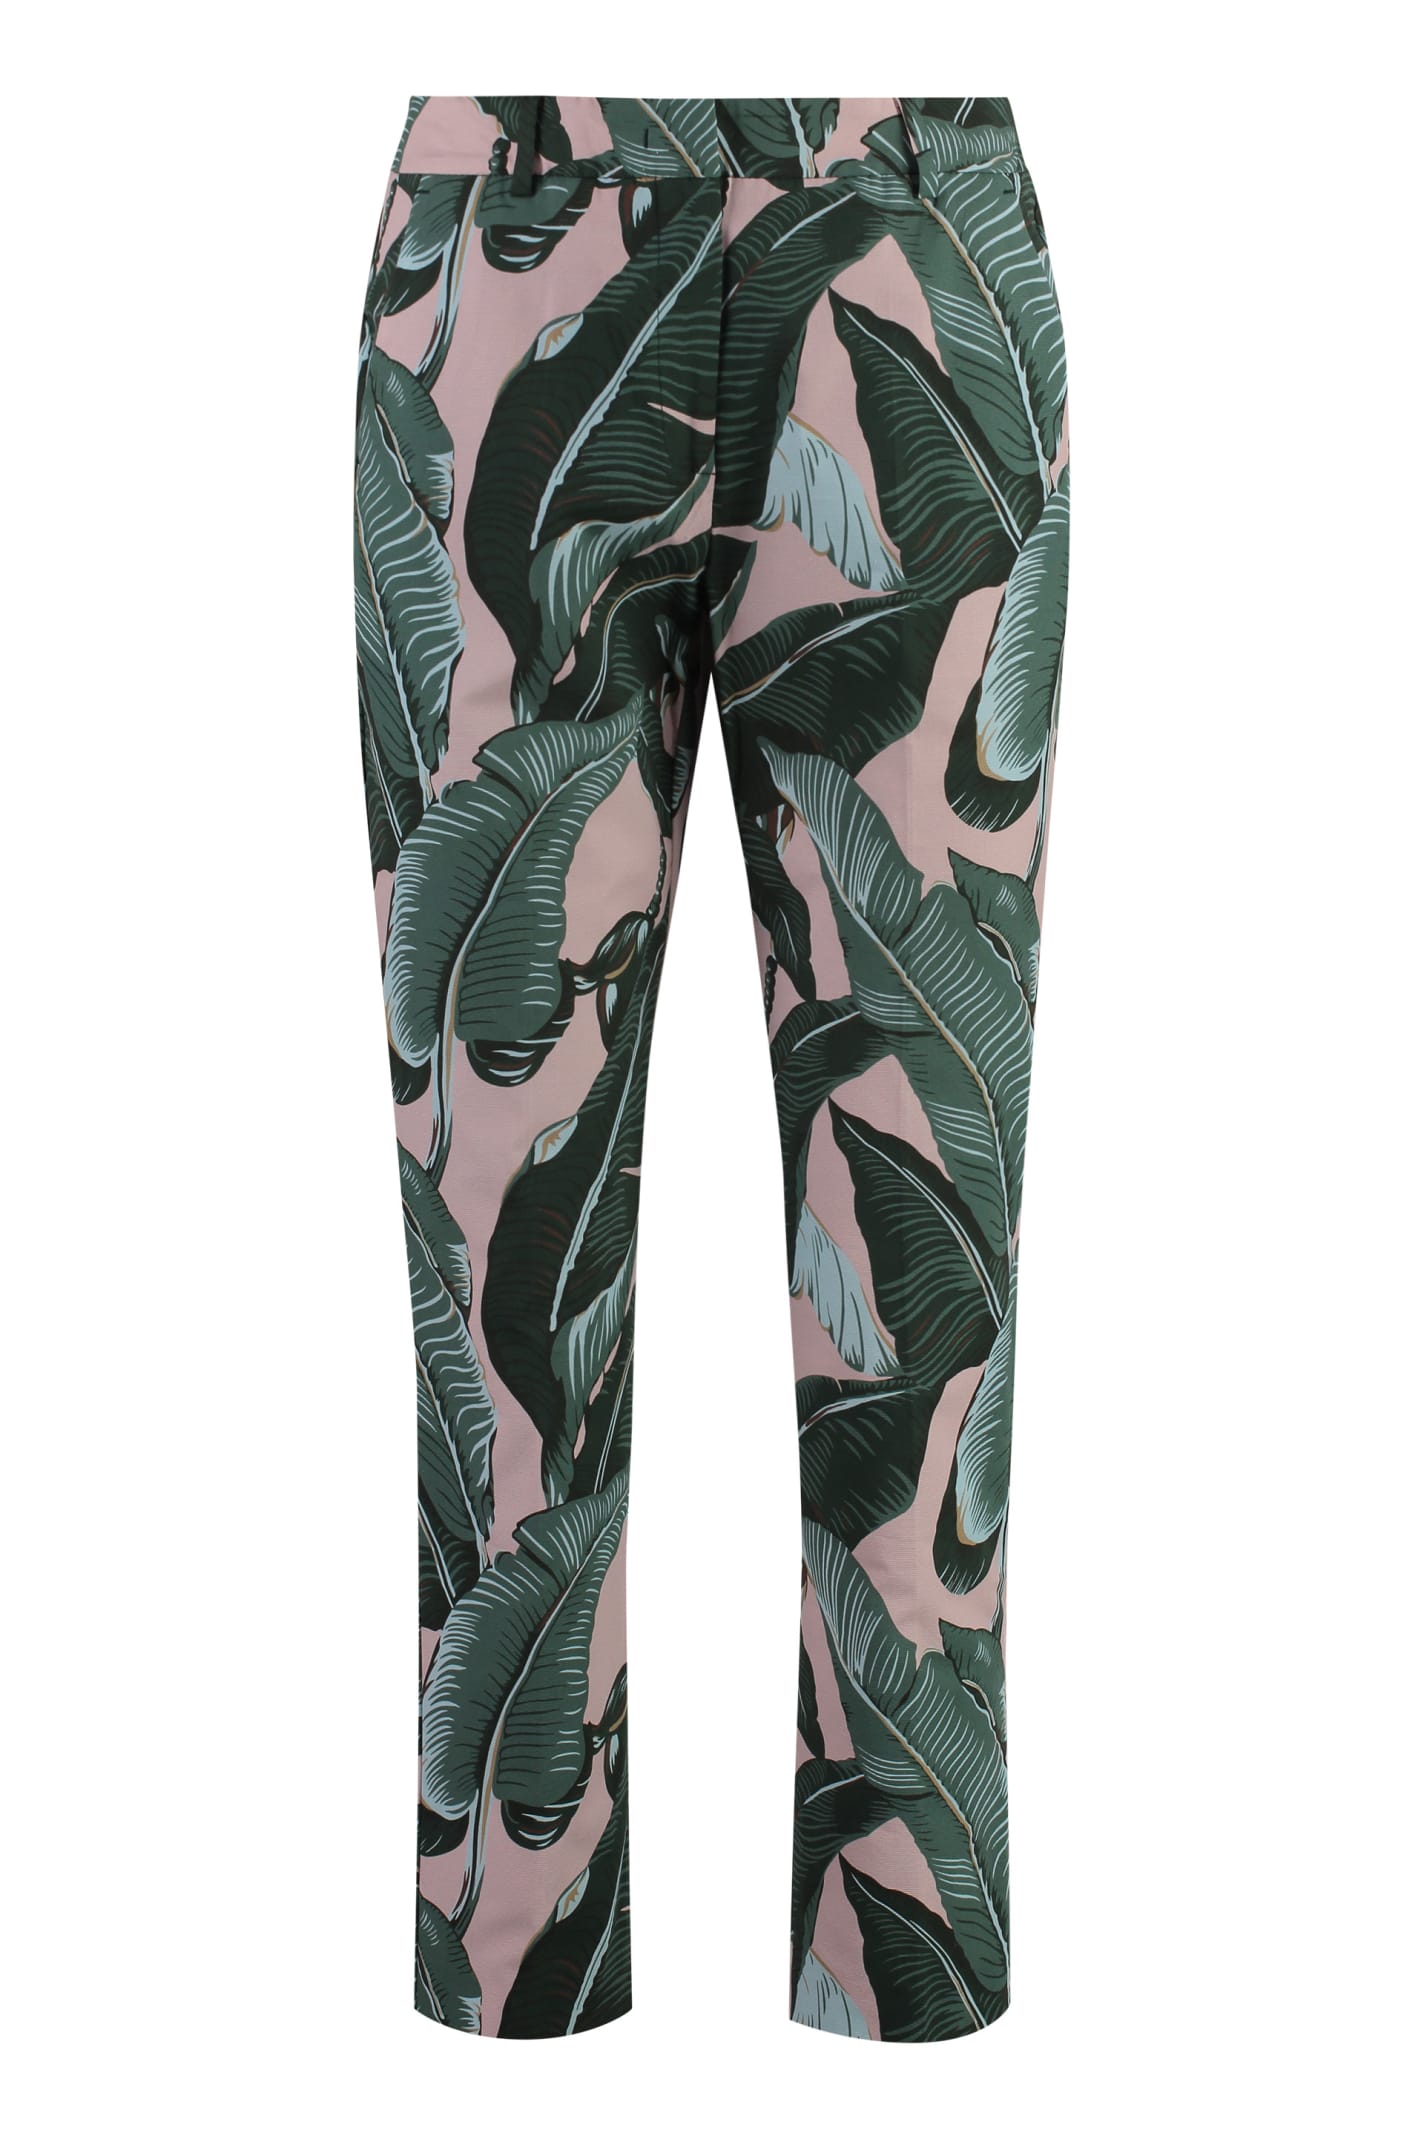 Okra Printed Cotton Trousers